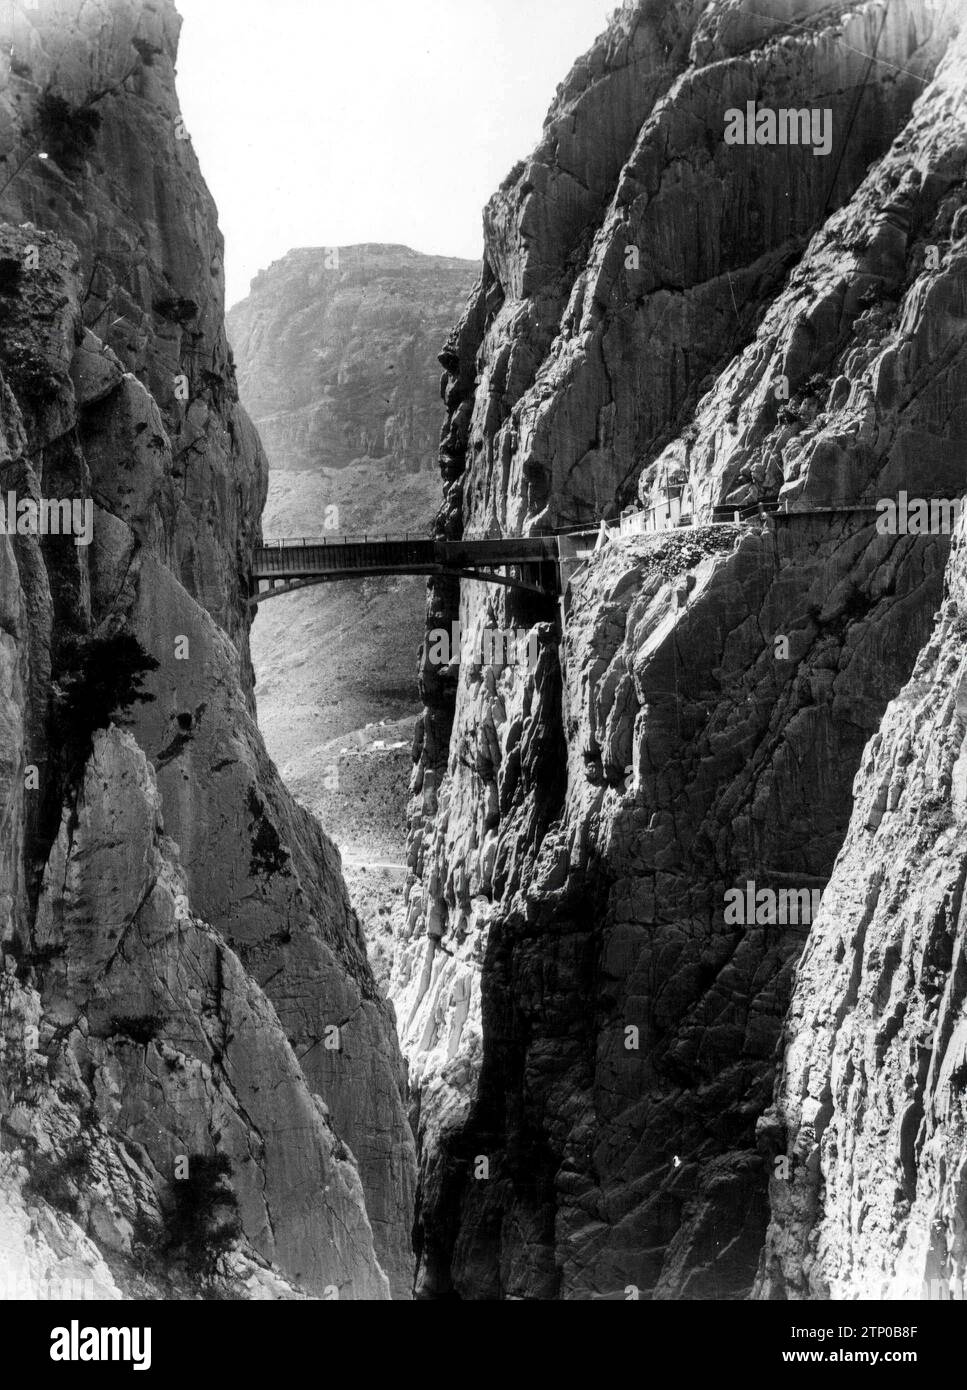 12/31/1924. Gitanes Gorge (Málaga). The gorge runs between the municipalities of Ardales, Álora and Antequera, next to the village and the El Chorro reservoir. There is a three-kilometer-long path that was built for maintenance workers to access the El Chorro reservoir, hanging from the walls of the gorge. King Alfonso XIII visited it in 1921 and since then it began to be known as Caminito del Rey. Credit: Album / Archivo ABC / Carlos Aguilera Bazán Stock Photo